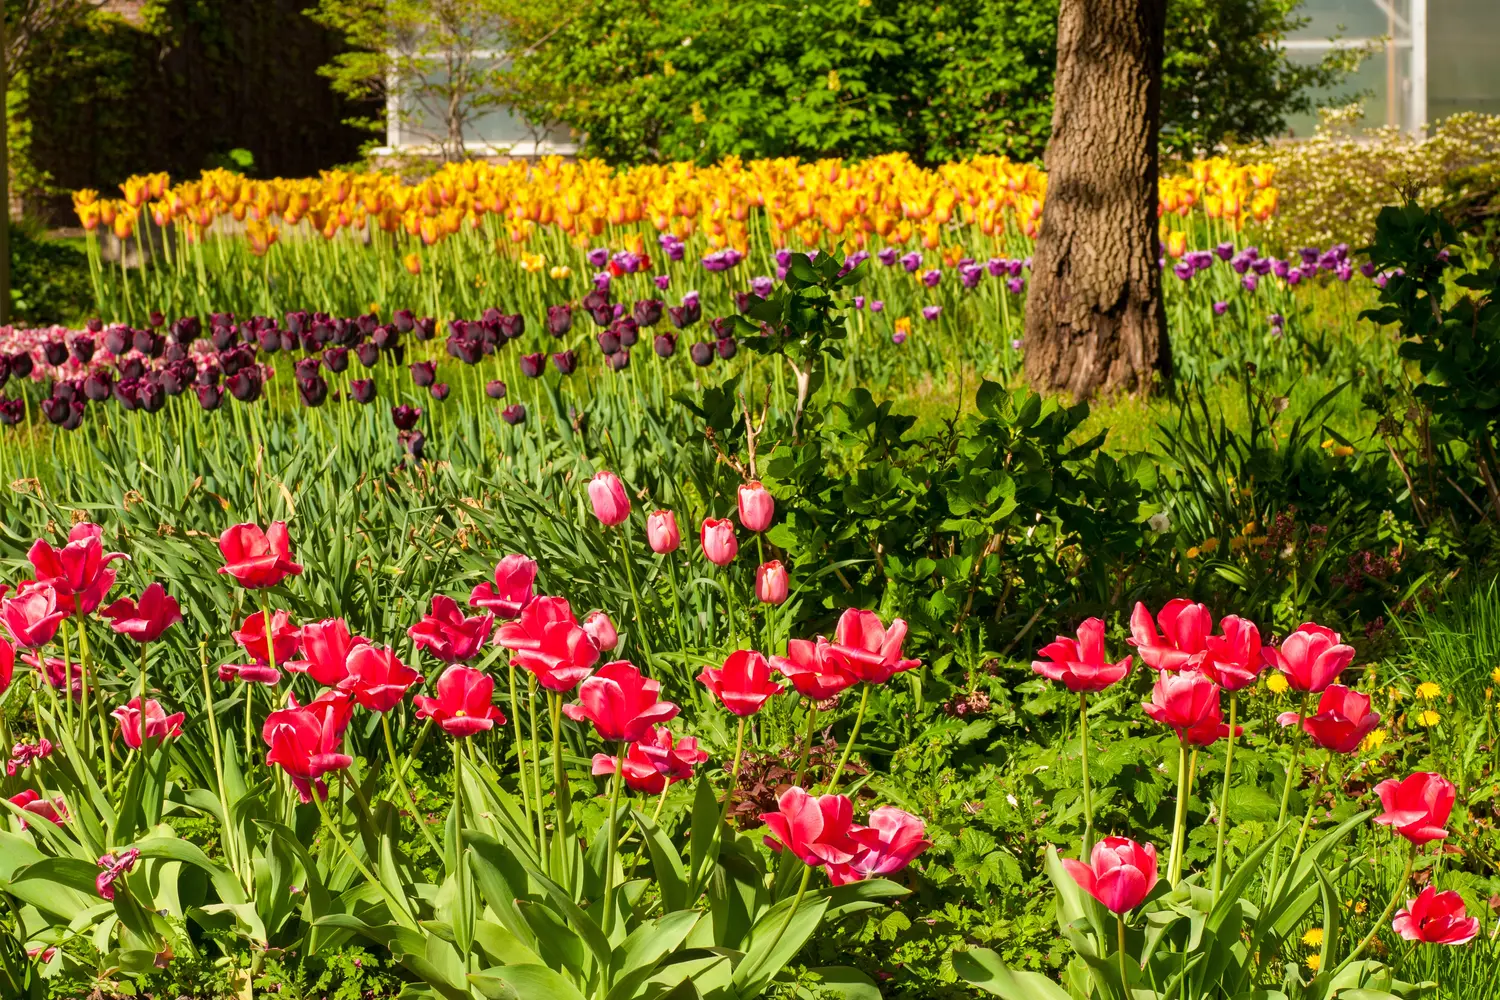 Tulips at the Botanical Garden in Cleveland, Ohio